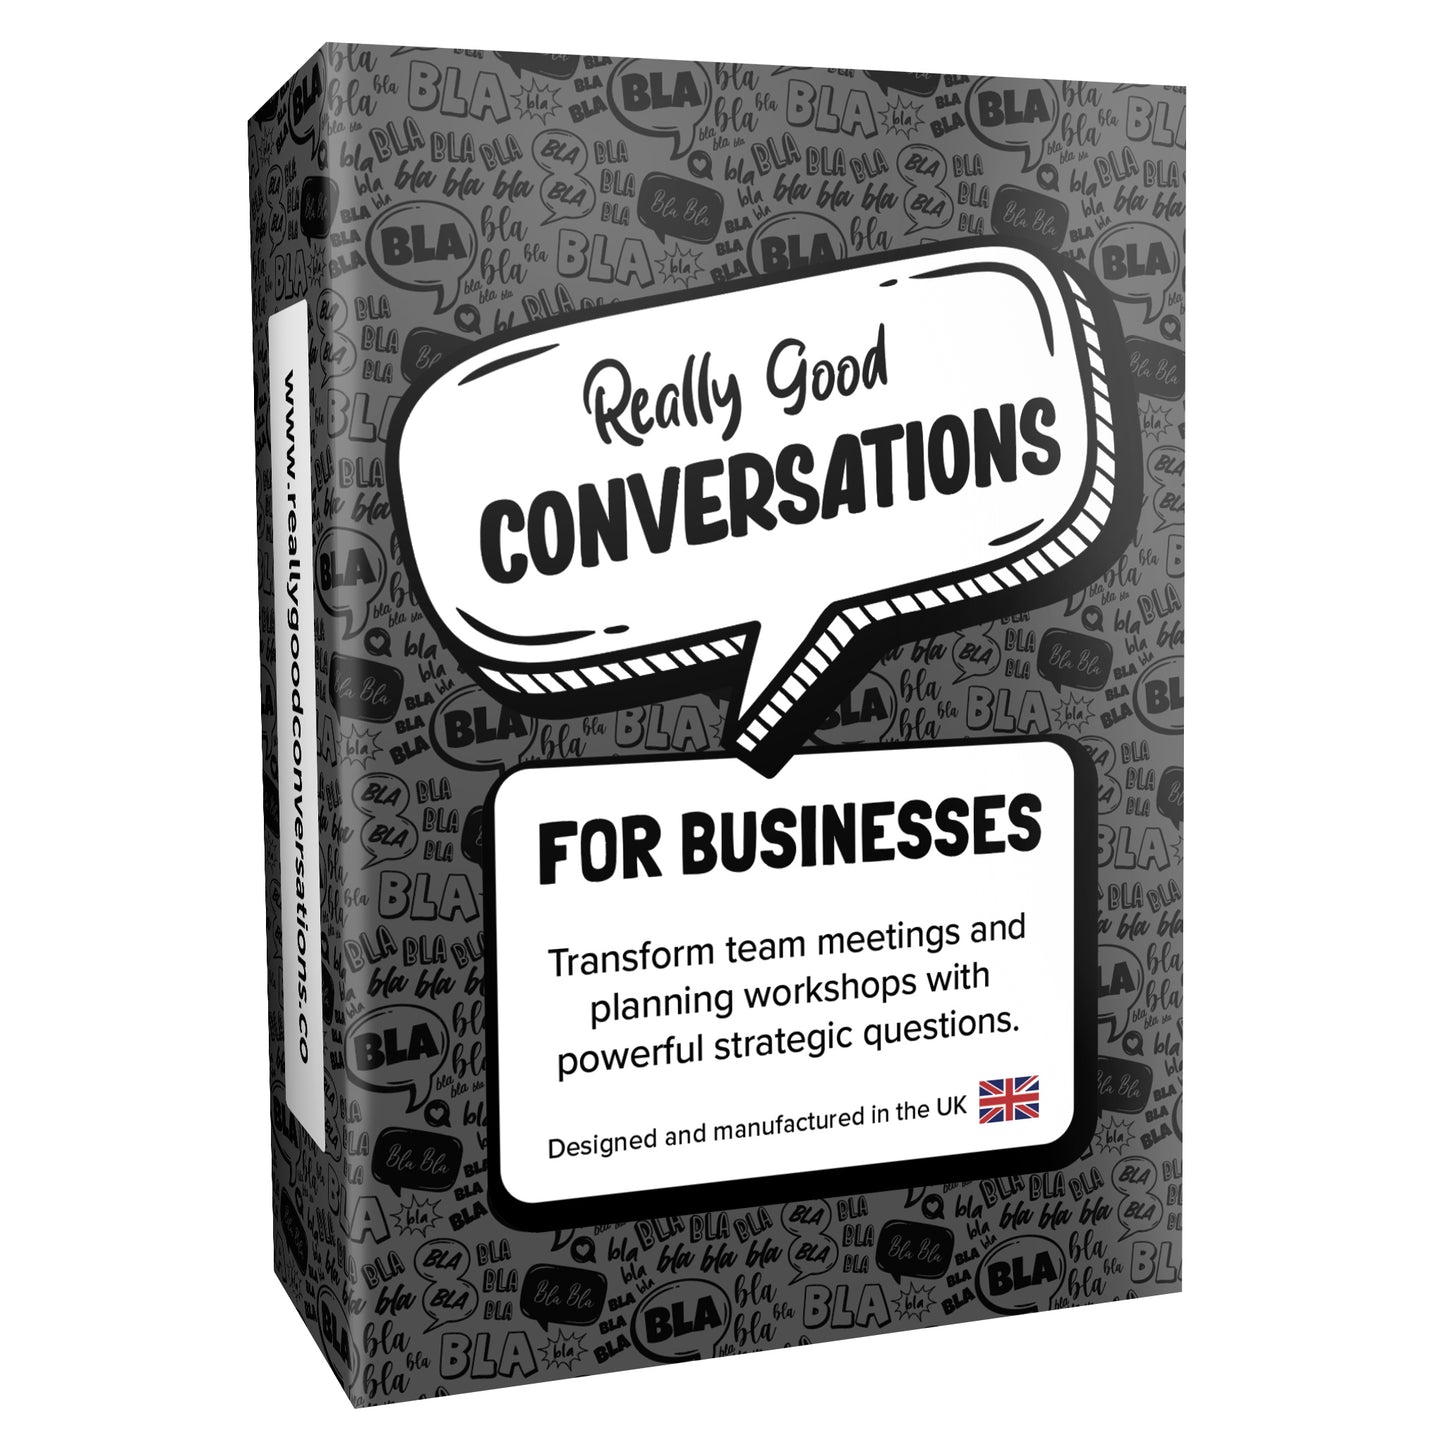 Really Good Conversations for Businesses